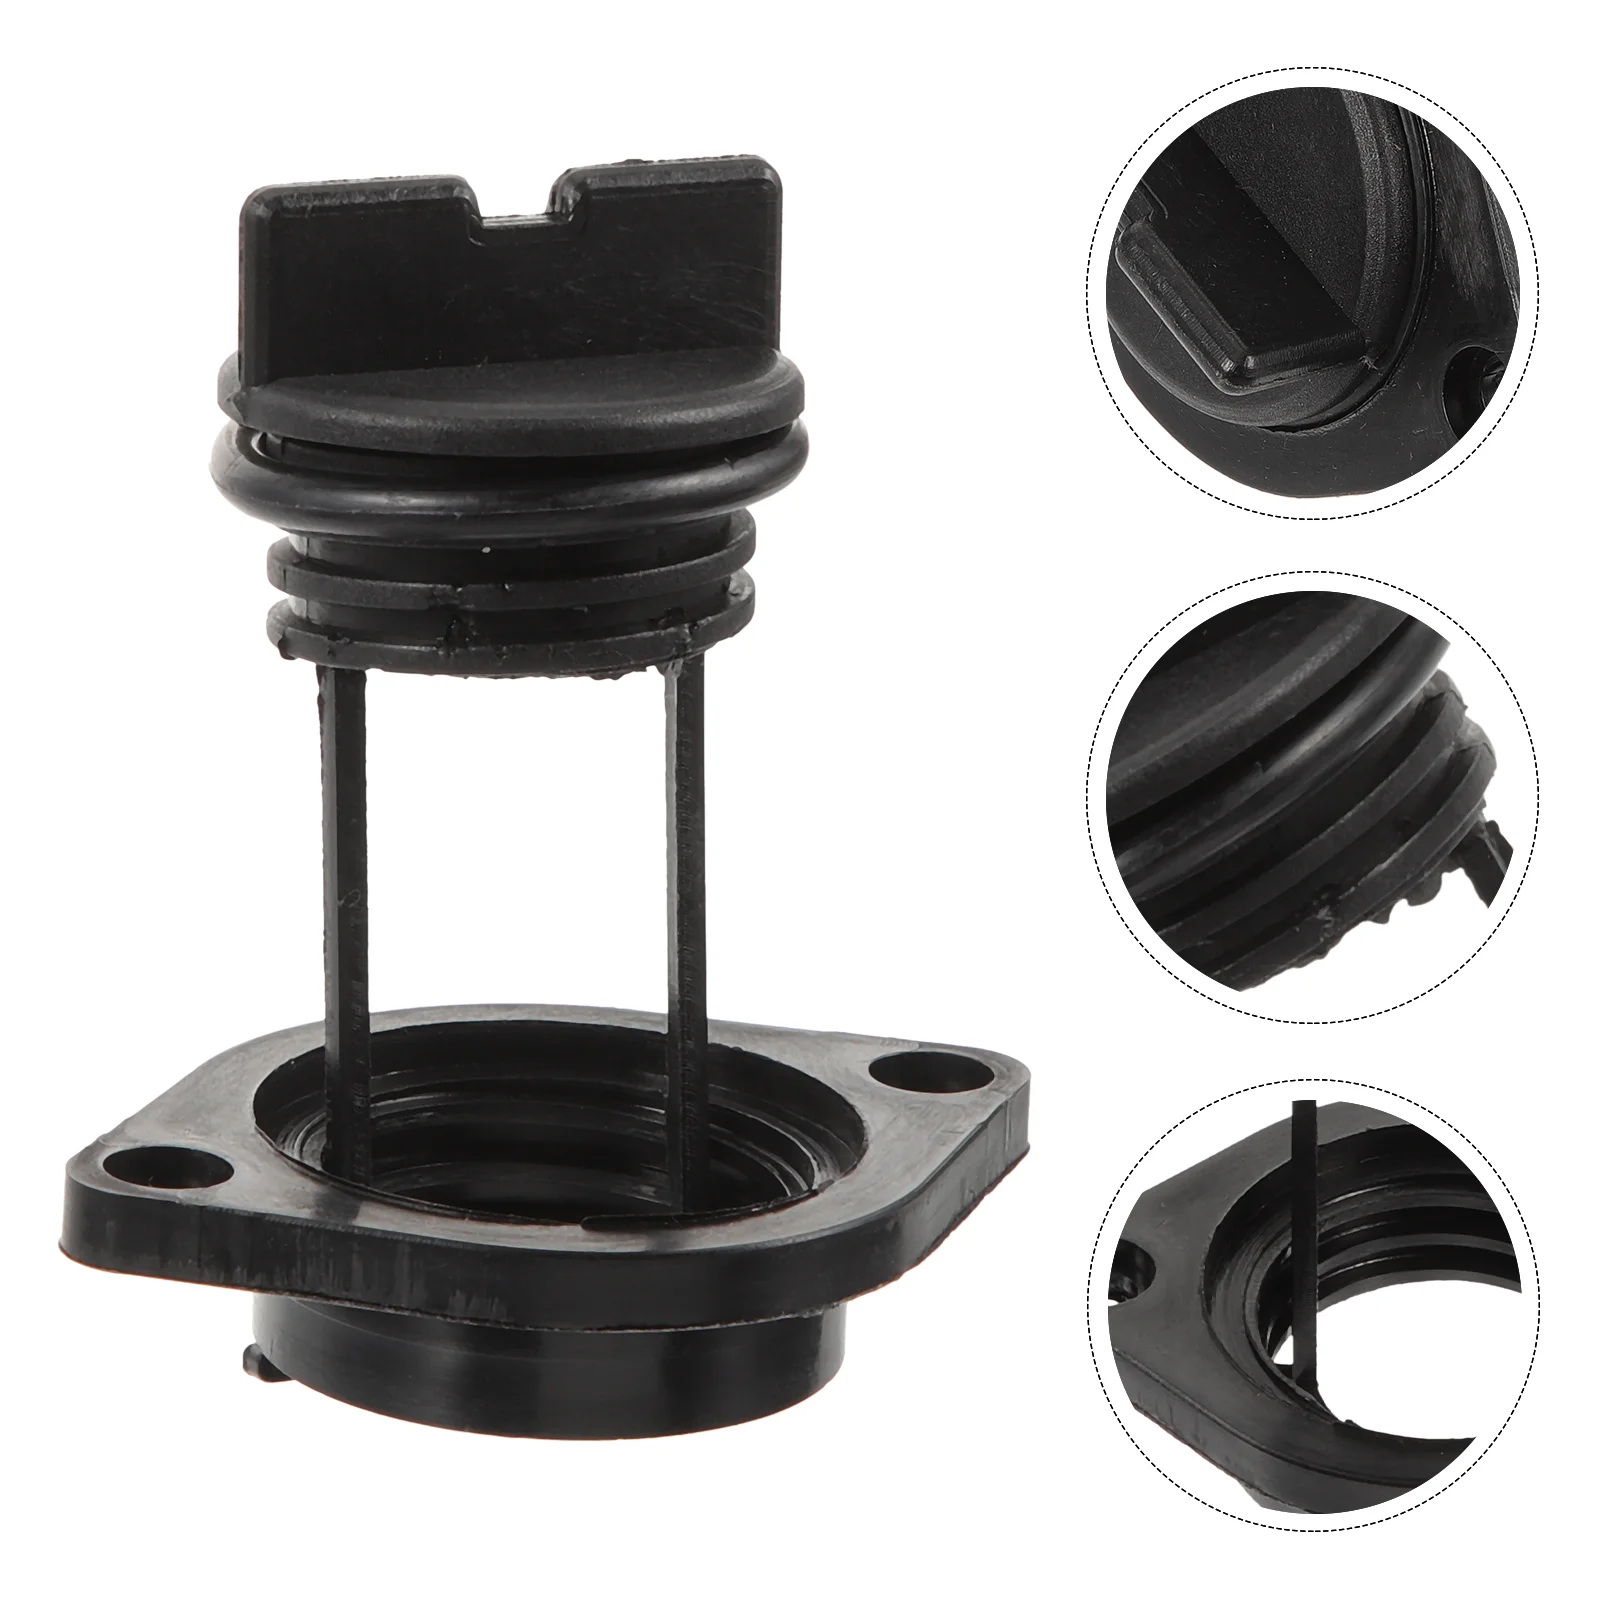 

Drain Plug Boat Accessories Kayak Replacement Plugs Marine Holes Scupper Valves Boats Stopper